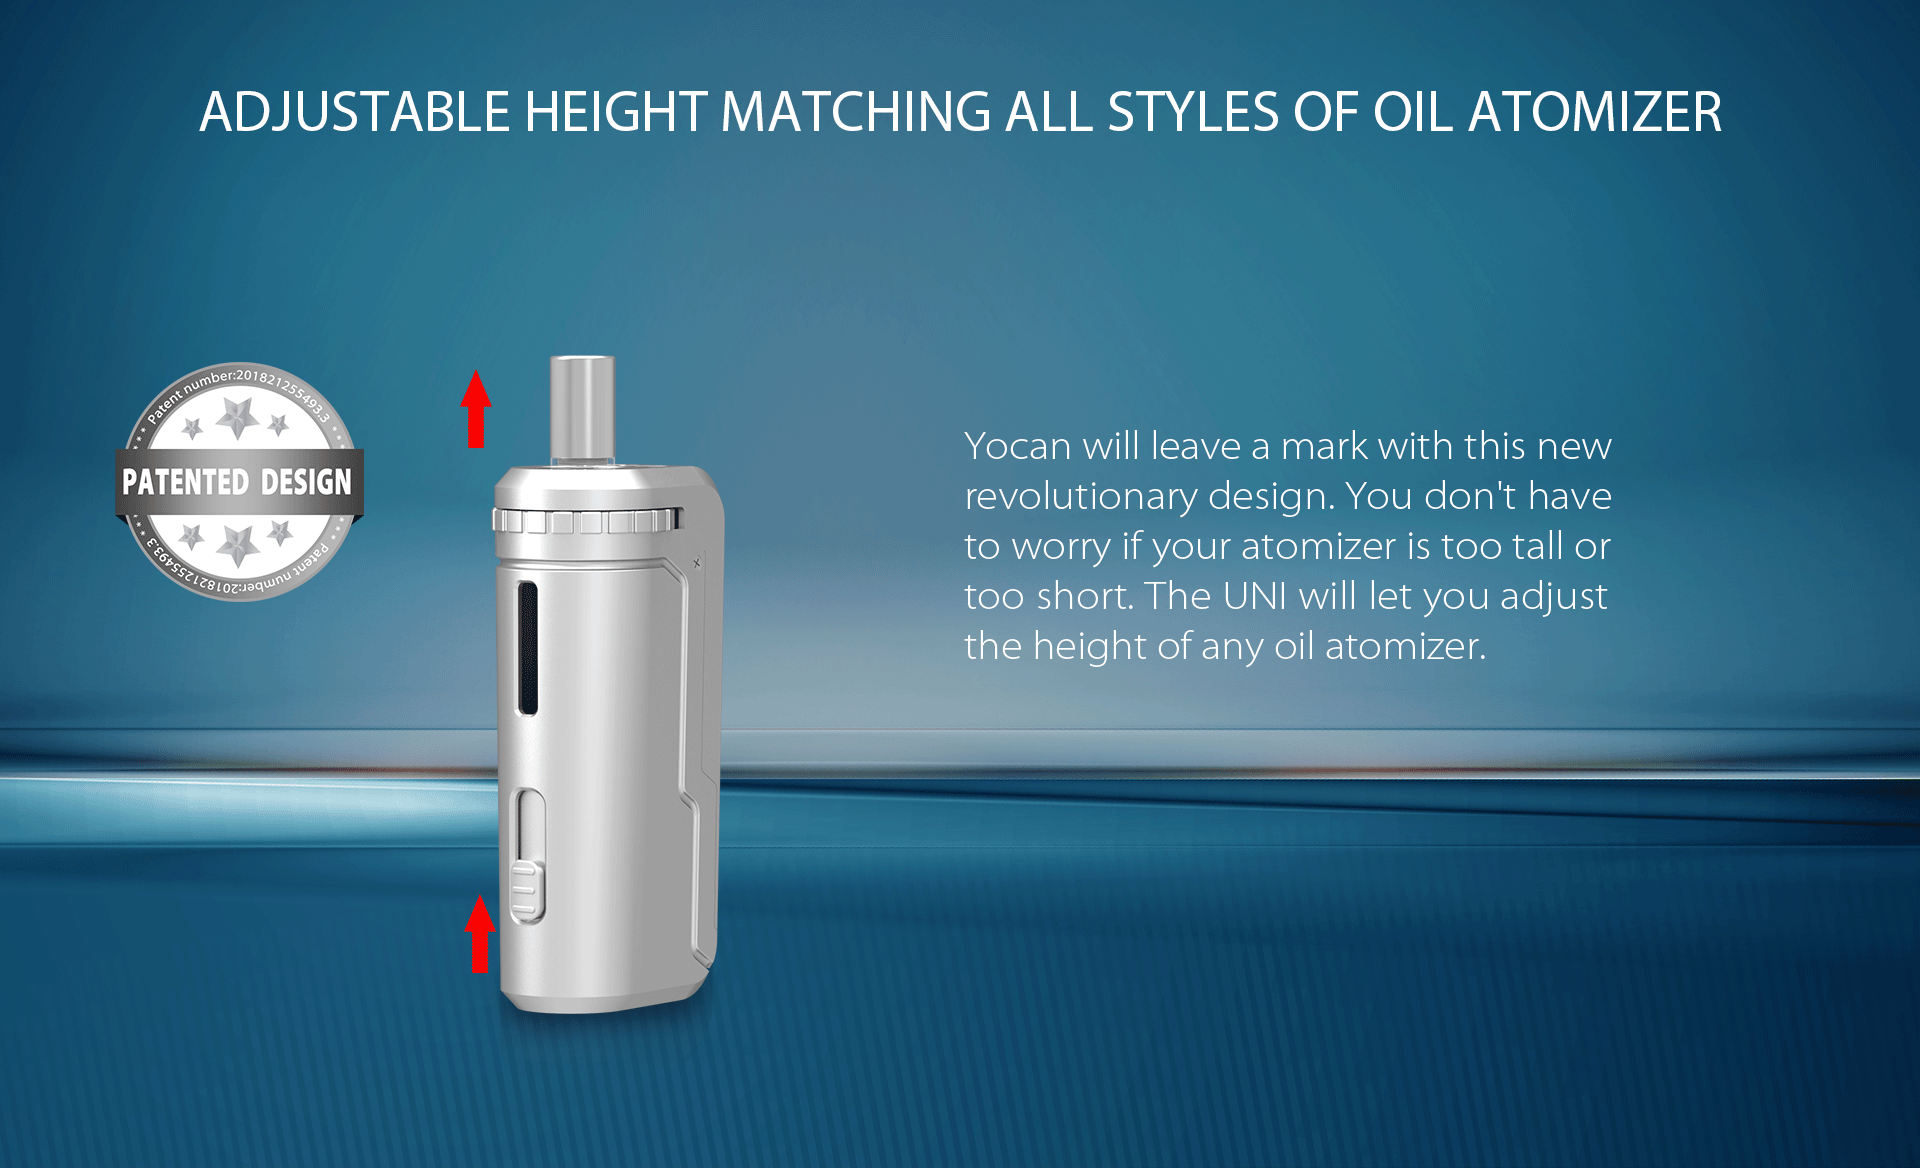 Yocan UNI adjustable height matching all styles of oil atomizer